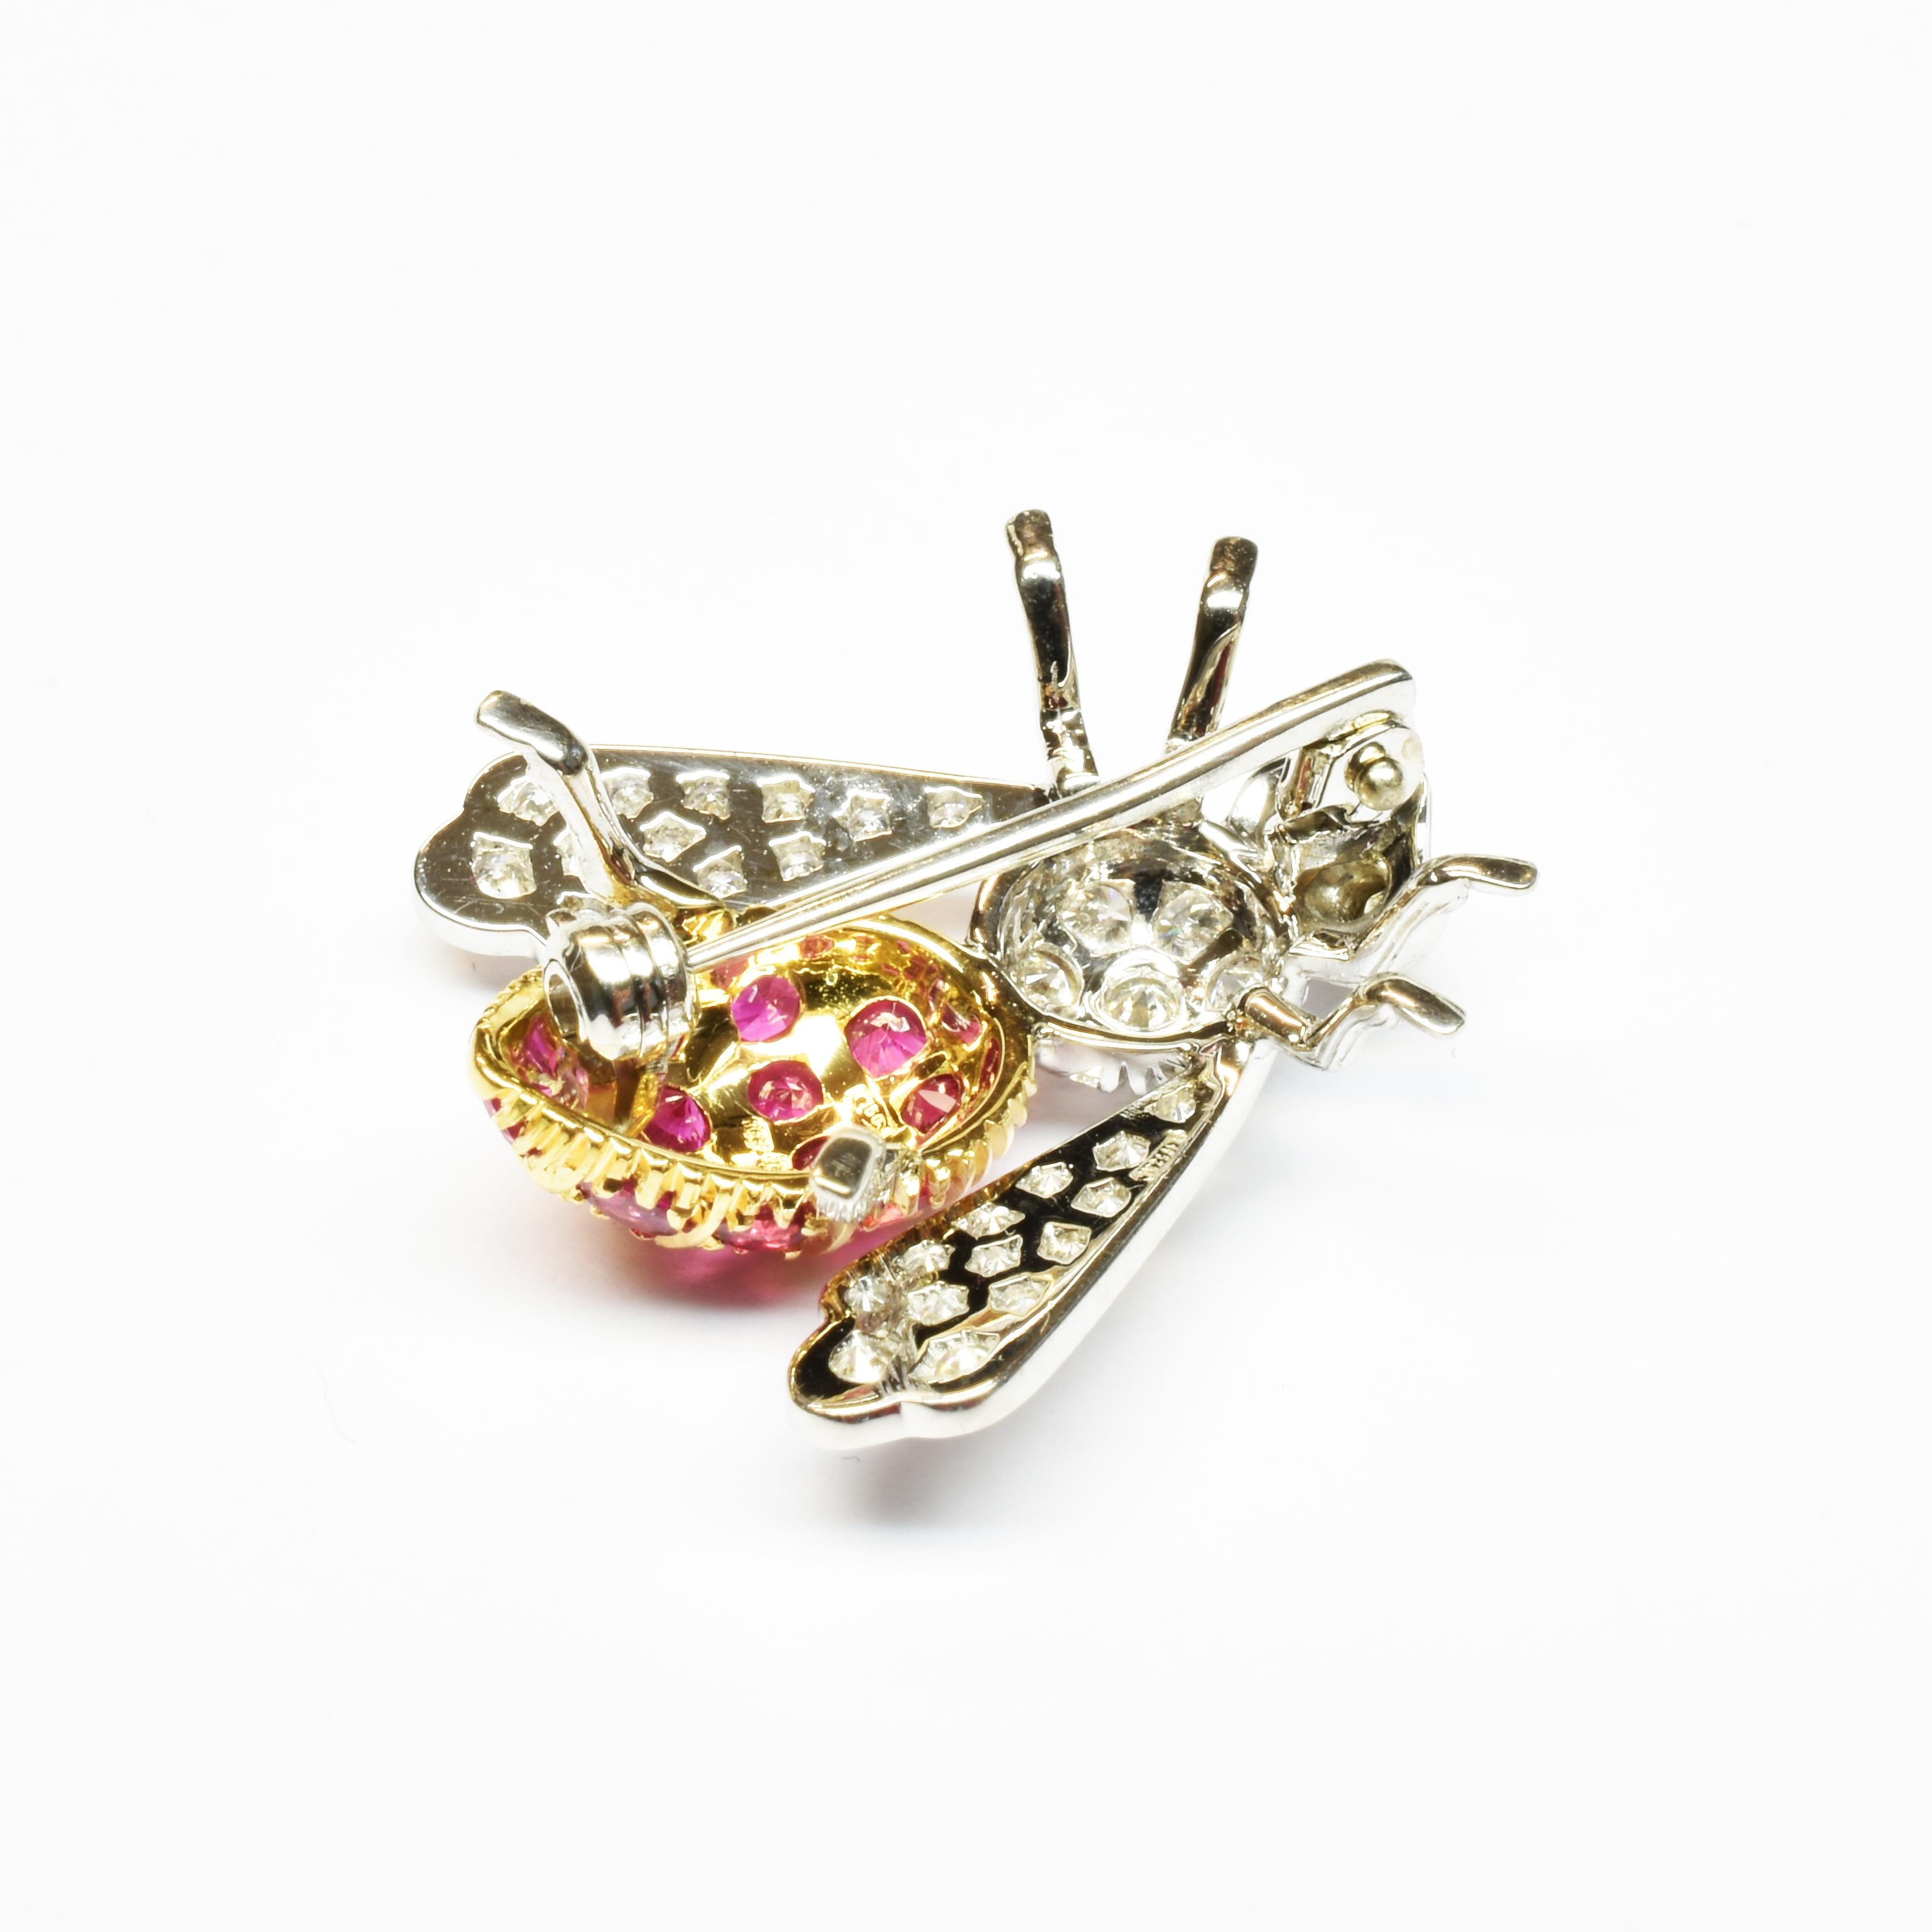 Women's Diamonds and Rubies Gold Bee Brooch Made in Italy